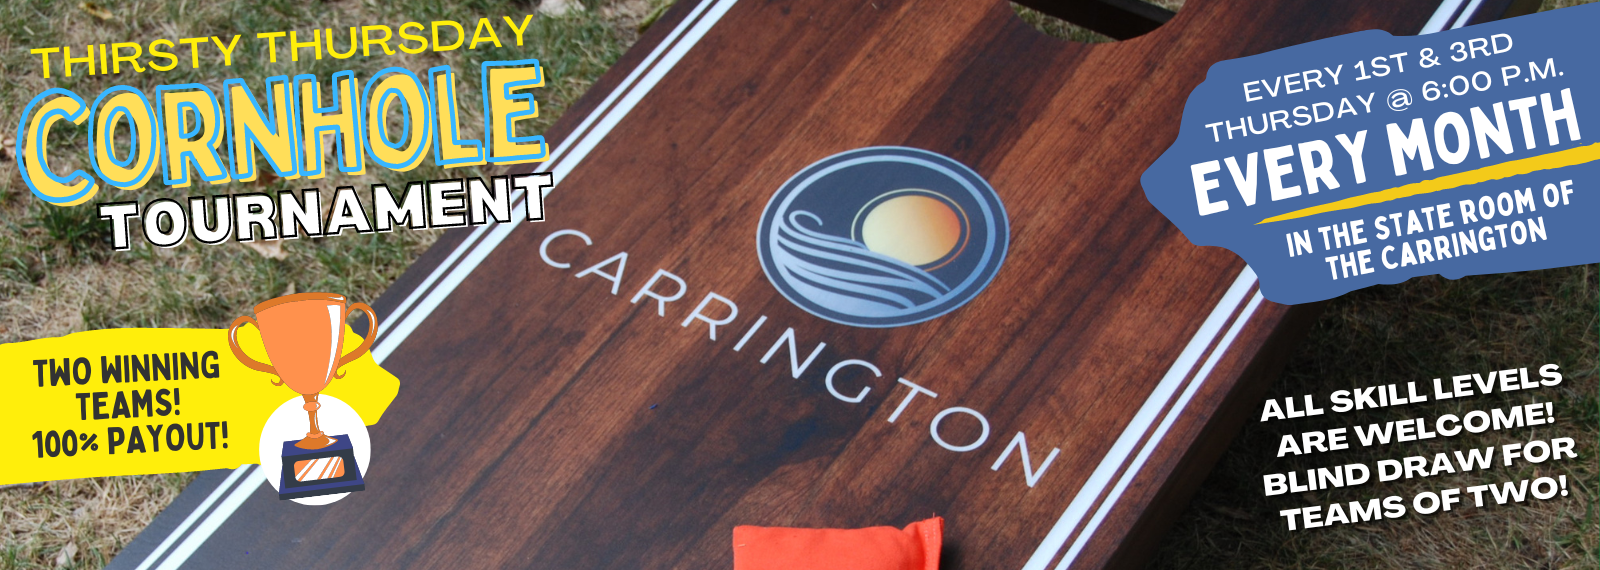 Carrington's Thirsty Thursday Cornhole Tournament is every first and third Thursday of the month, starting at 6:00 p.m.